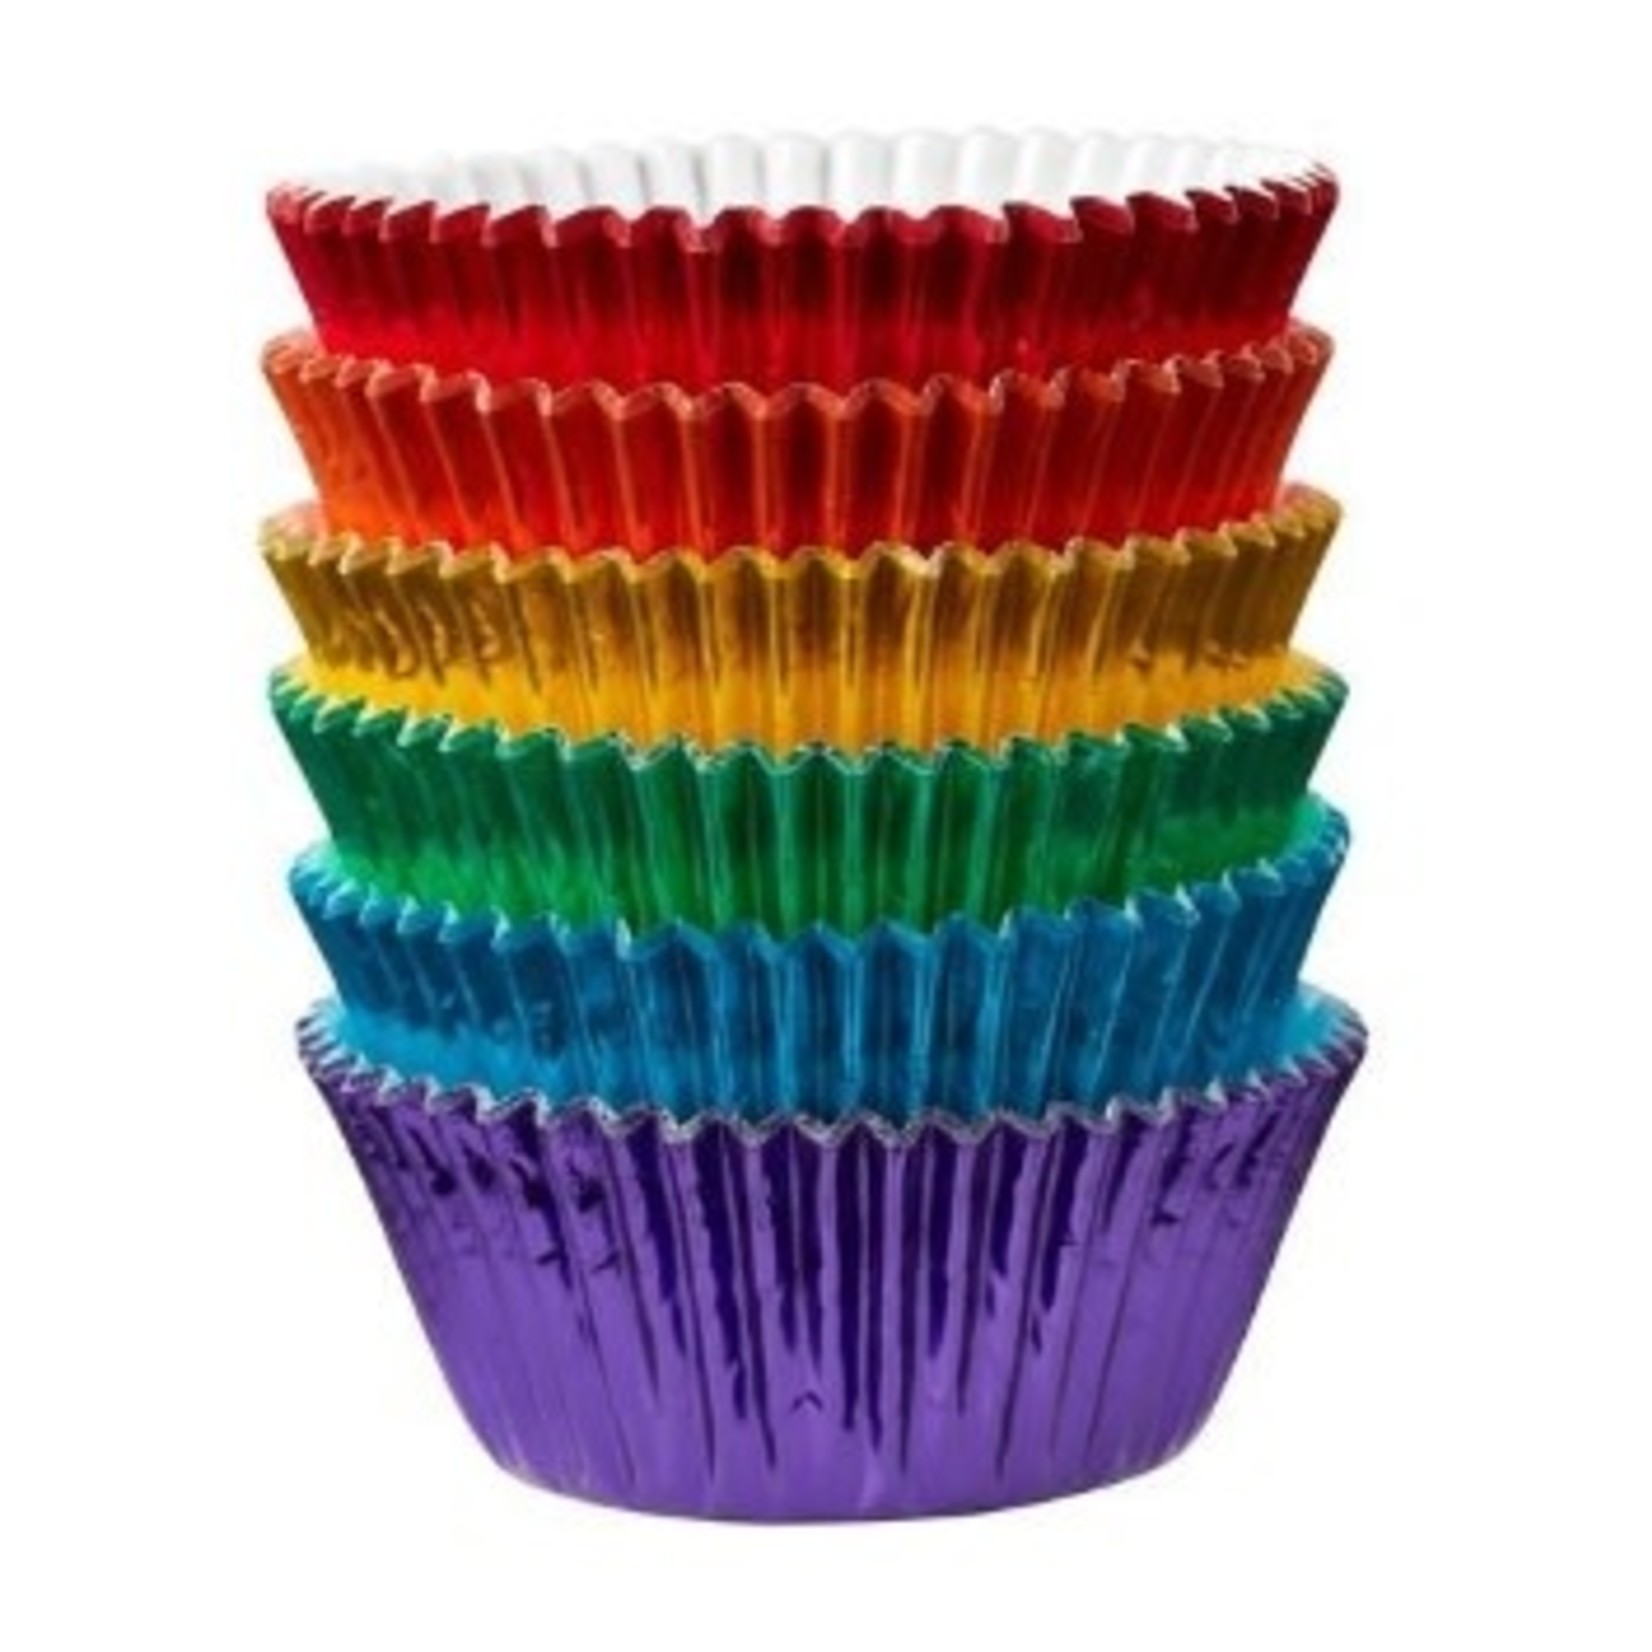 WILTON Baking Cup - Multi Coloured Foil - Kitchen Therapy